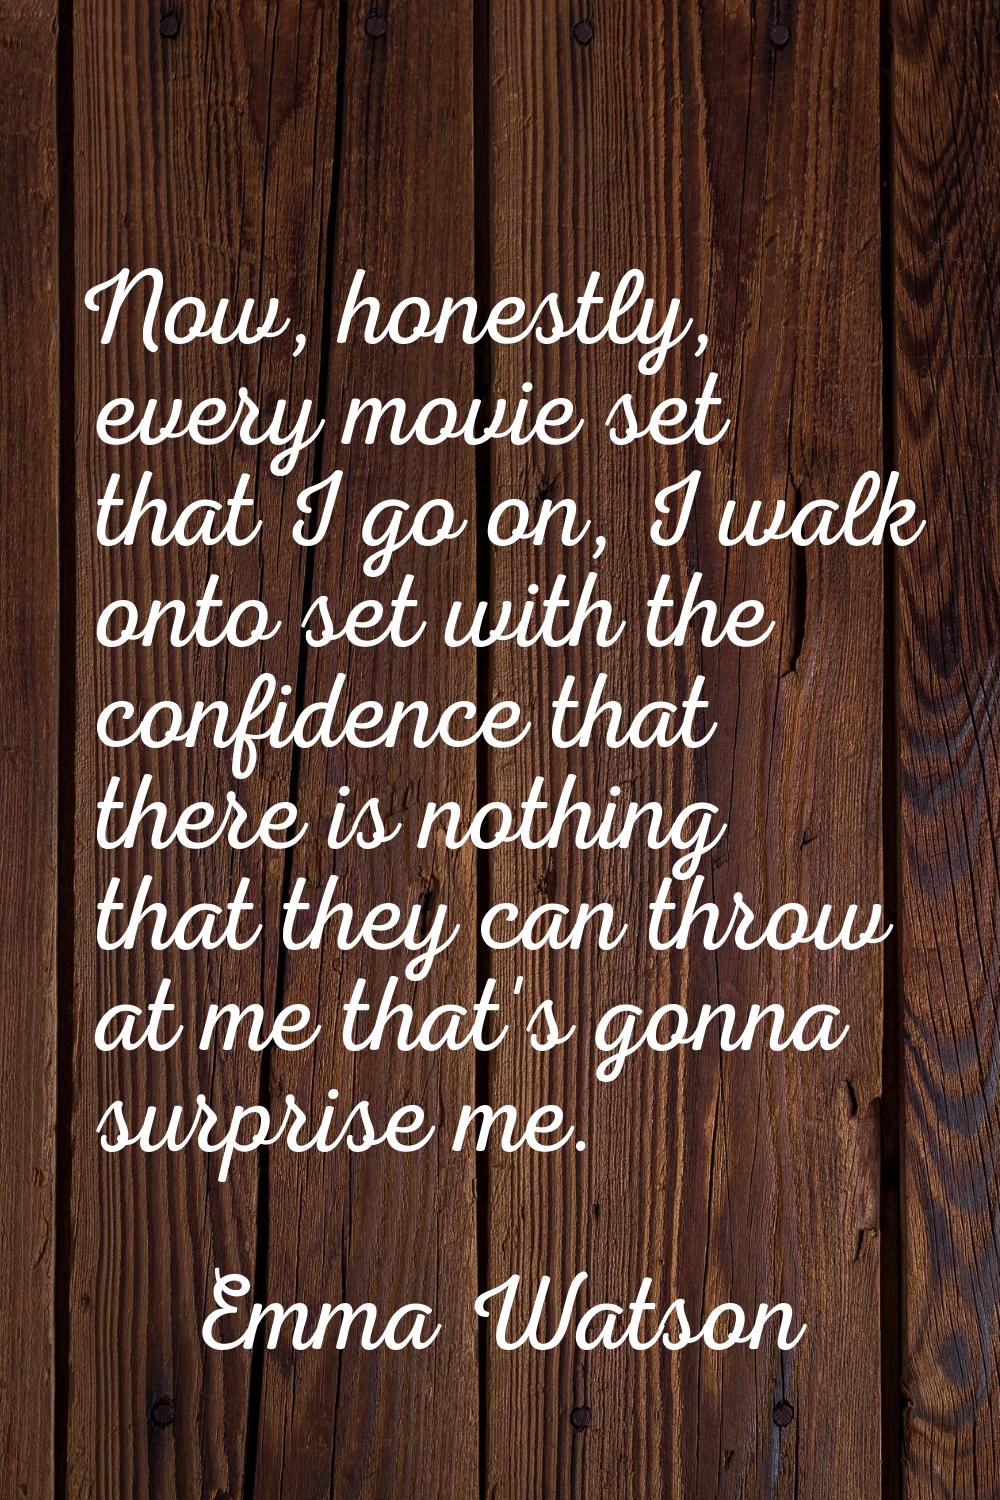 Now, honestly, every movie set that I go on, I walk onto set with the confidence that there is noth